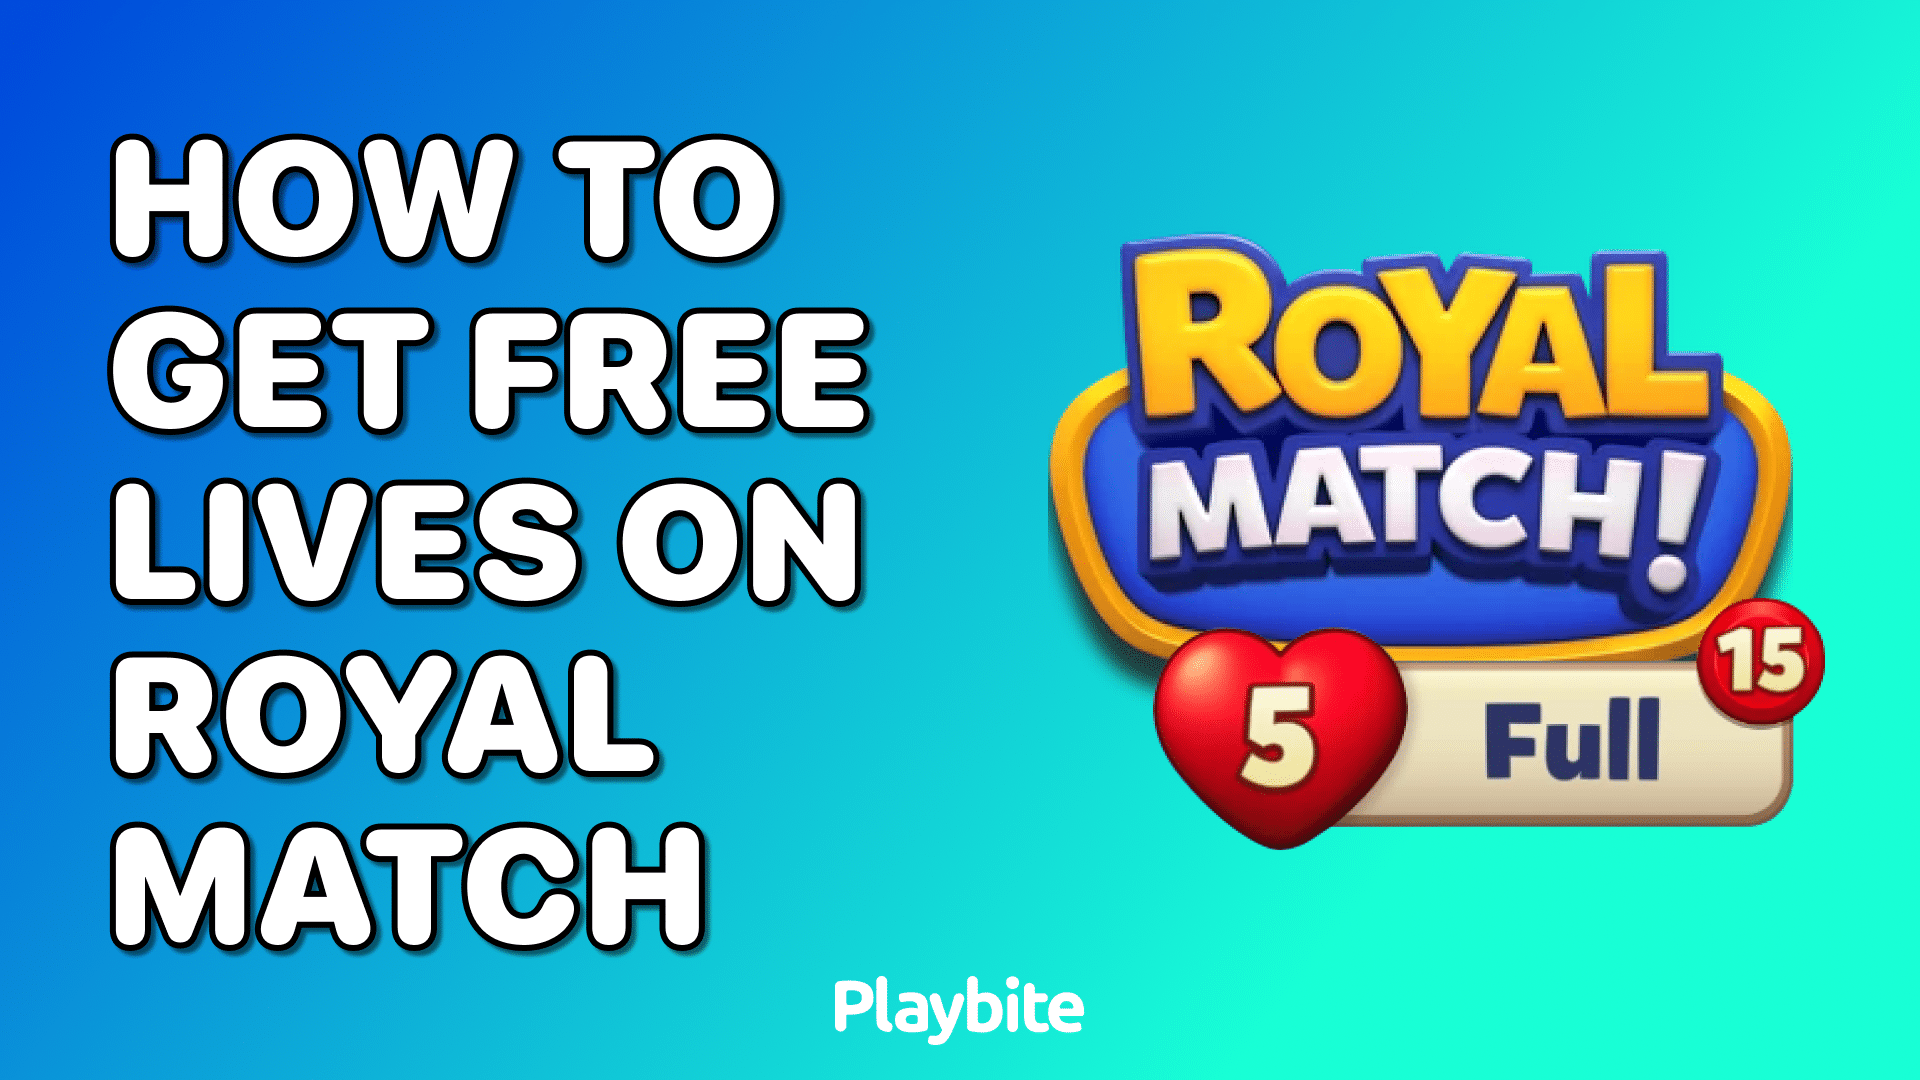 How To Get Free Lives On Royal Match